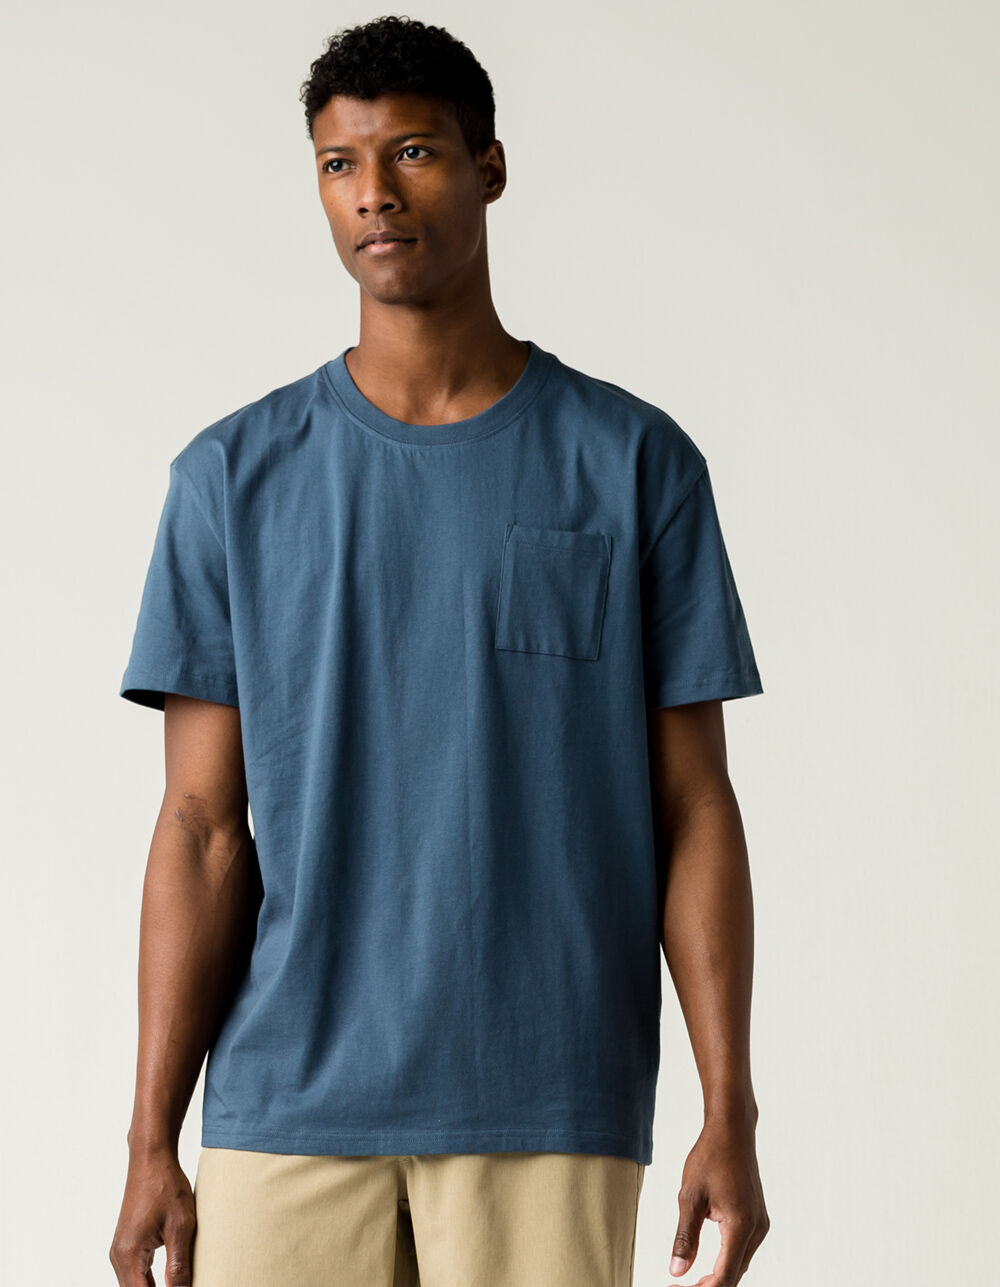 RSQ Oversized Solid Mens Washed Navy Pocket Tee - WASHED NAVY | Tillys